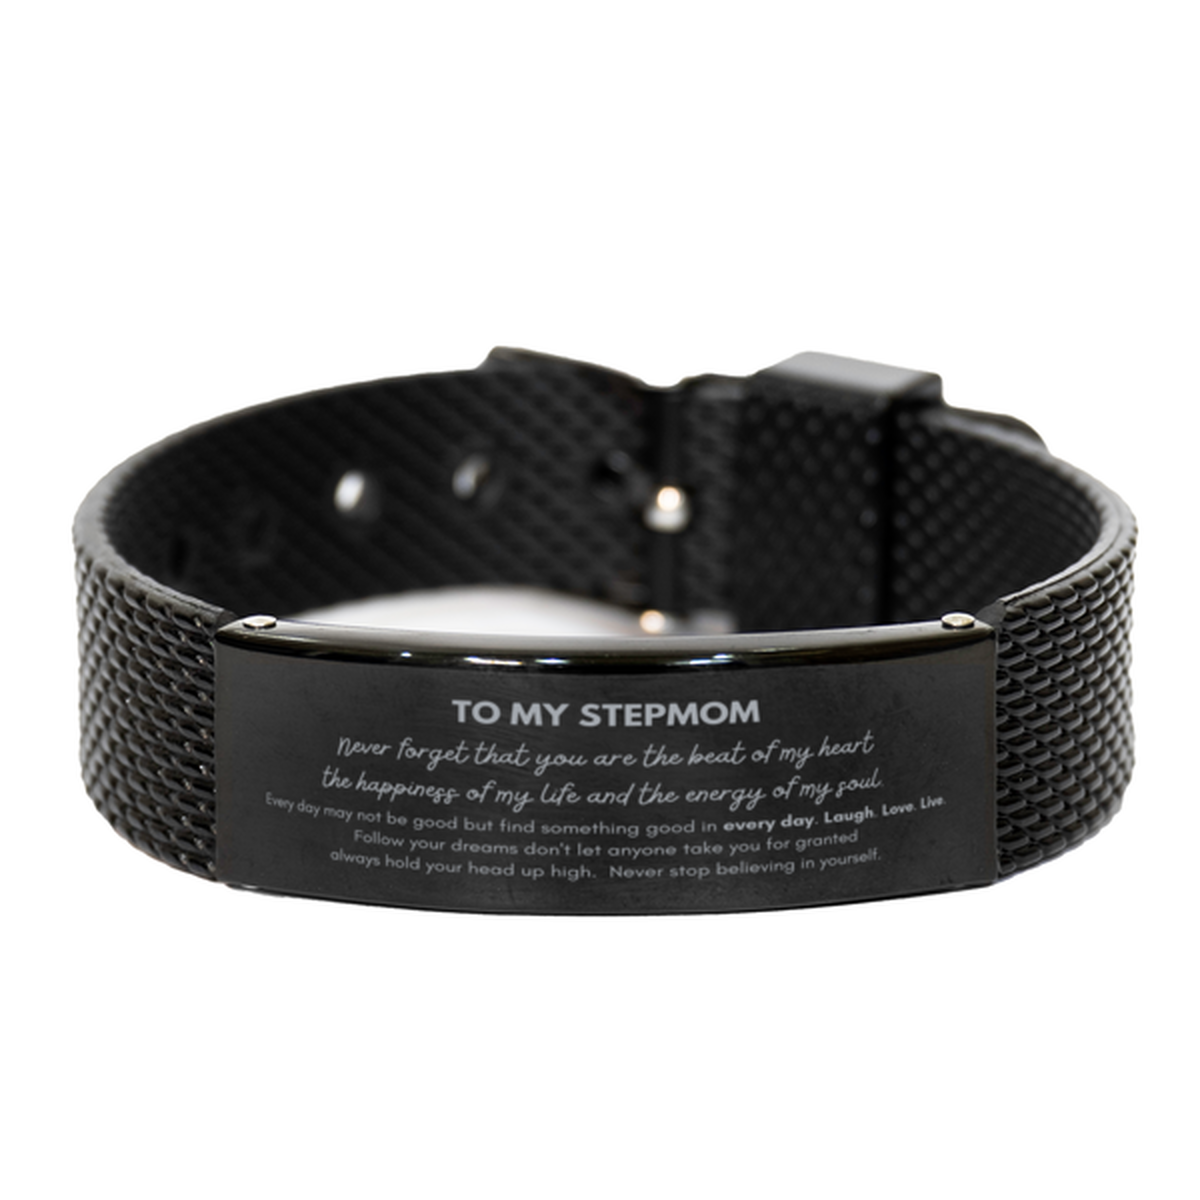 To My Stepmom Bracelet Gifts, Christmas Stepmom Black Shark Mesh Bracelet Present, Birthday Unique Motivational For Stepmom, To My Stepmom Never forget that you are the beat of my heart the happiness of my life and the energy of my soul